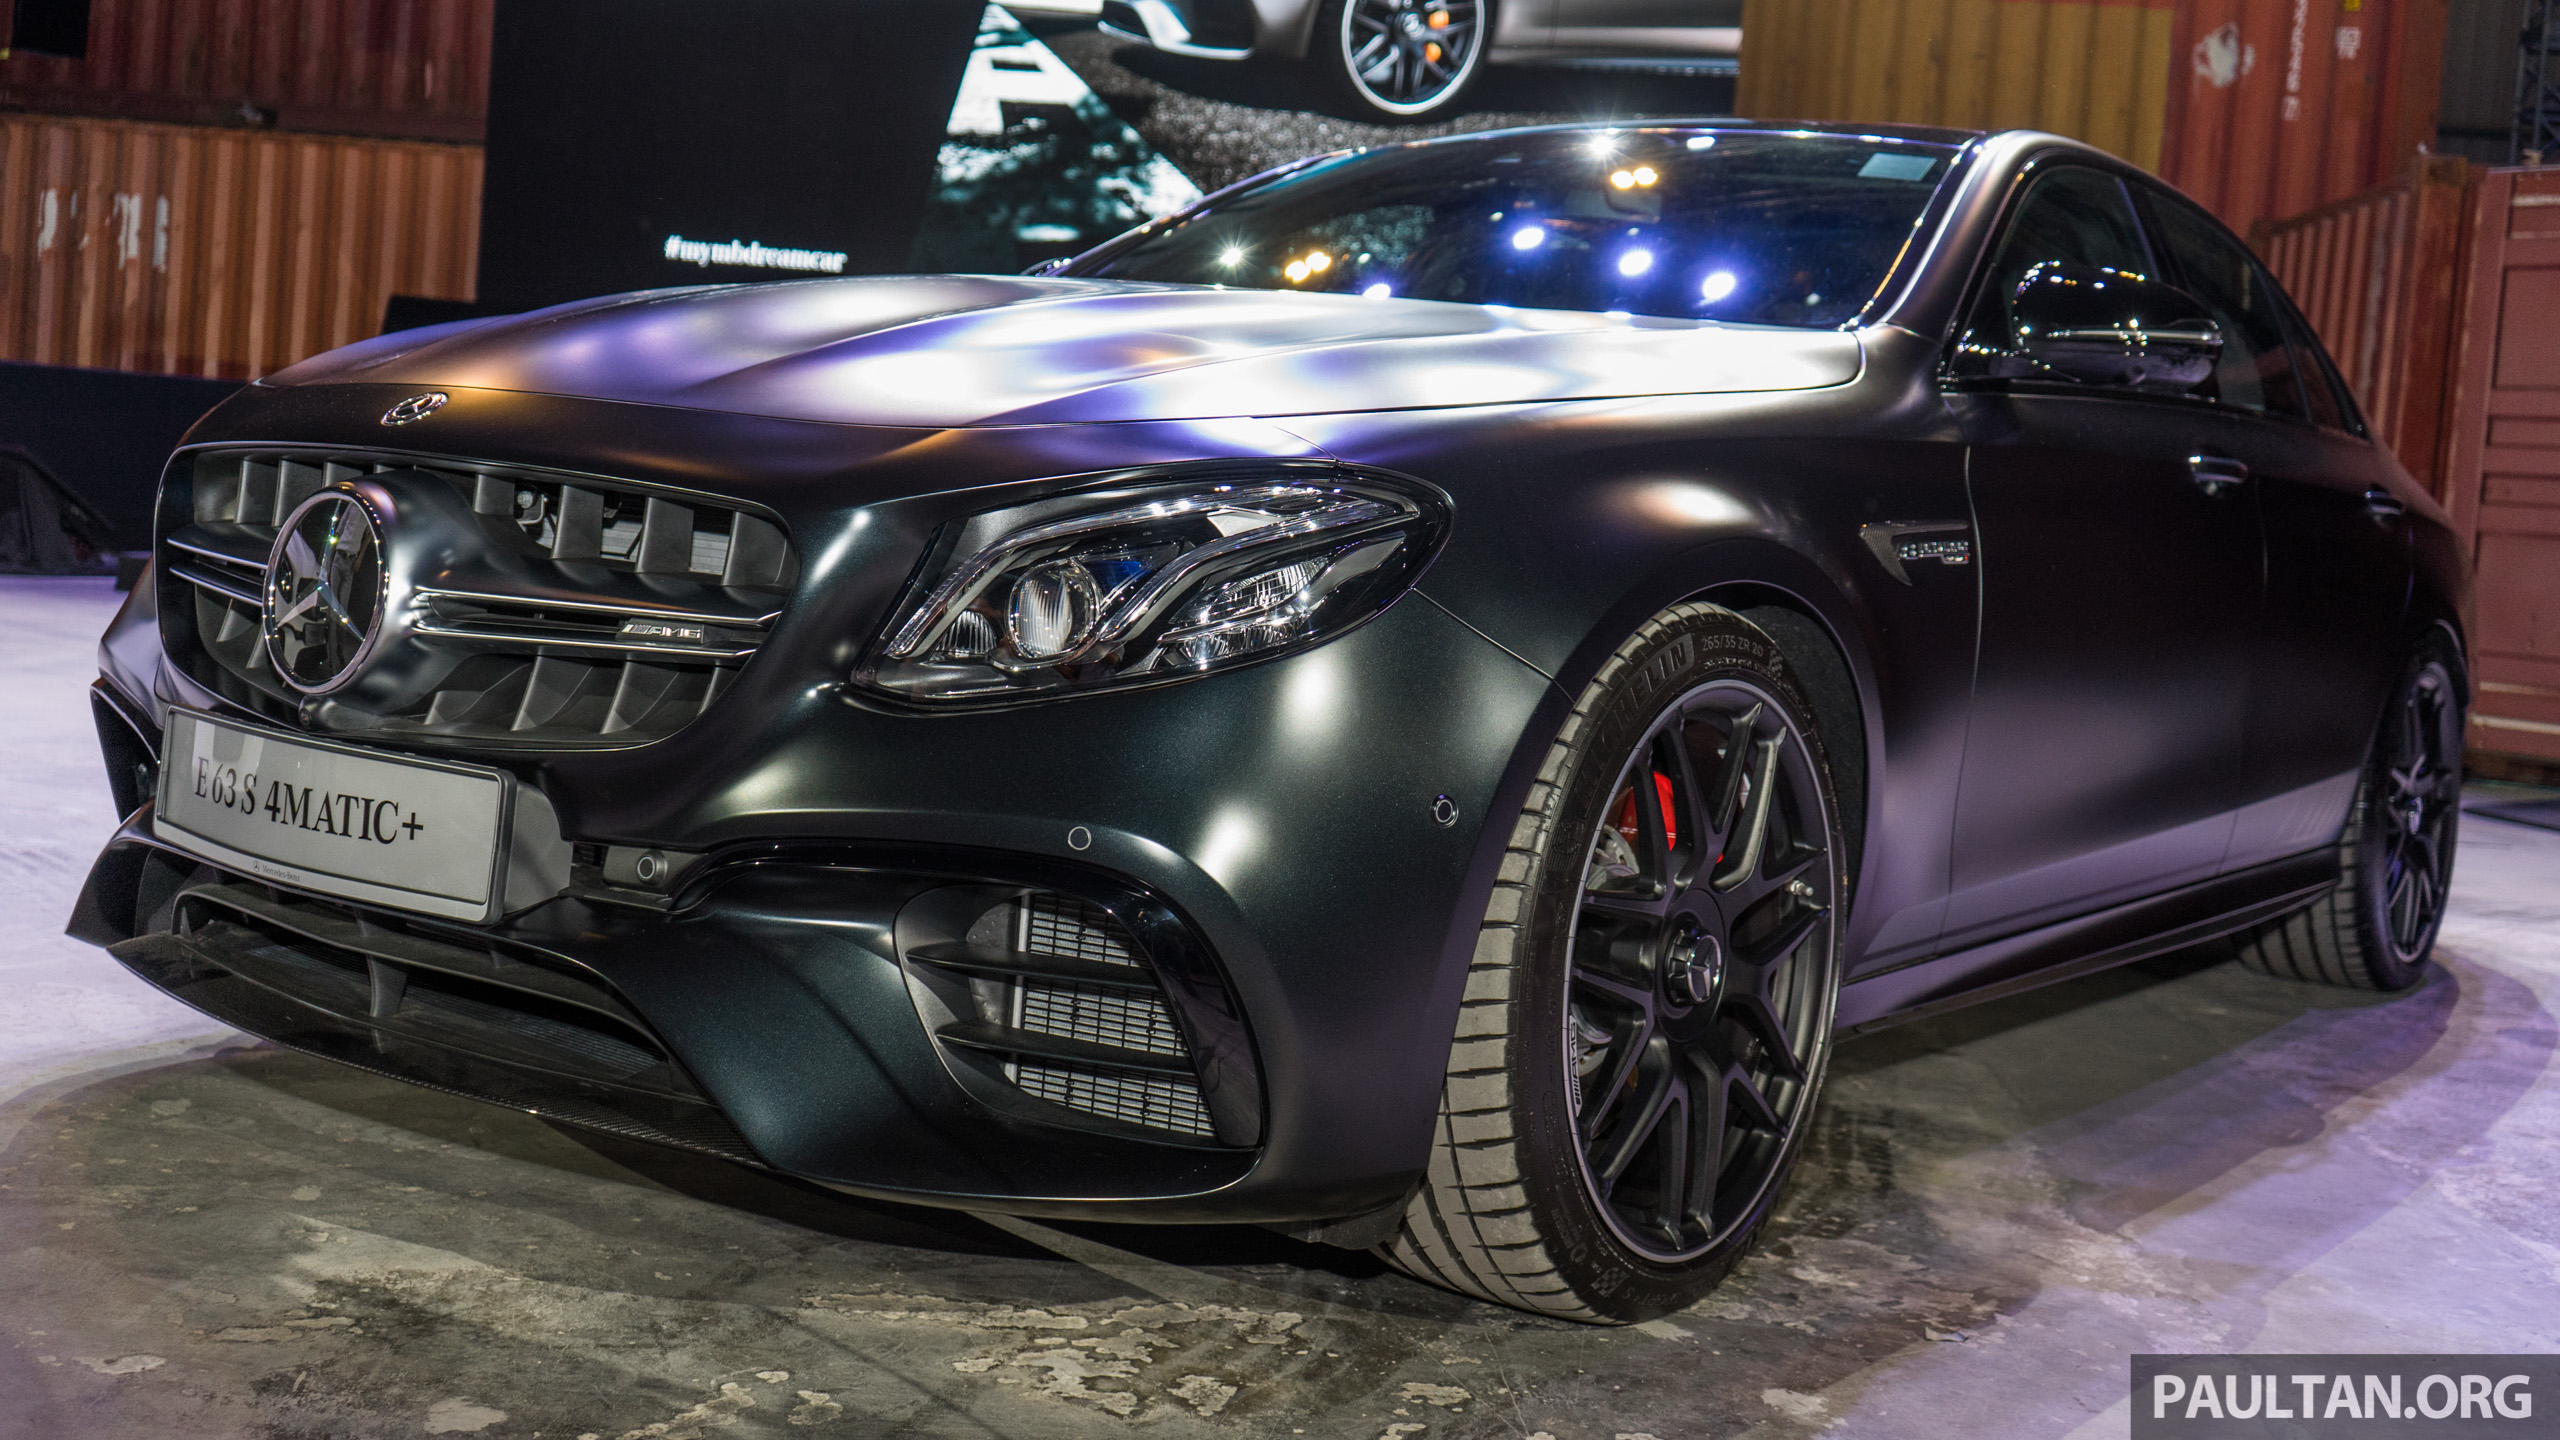 Mercedes-AMG E63 S Final Edition Signals The Beginning Of The End